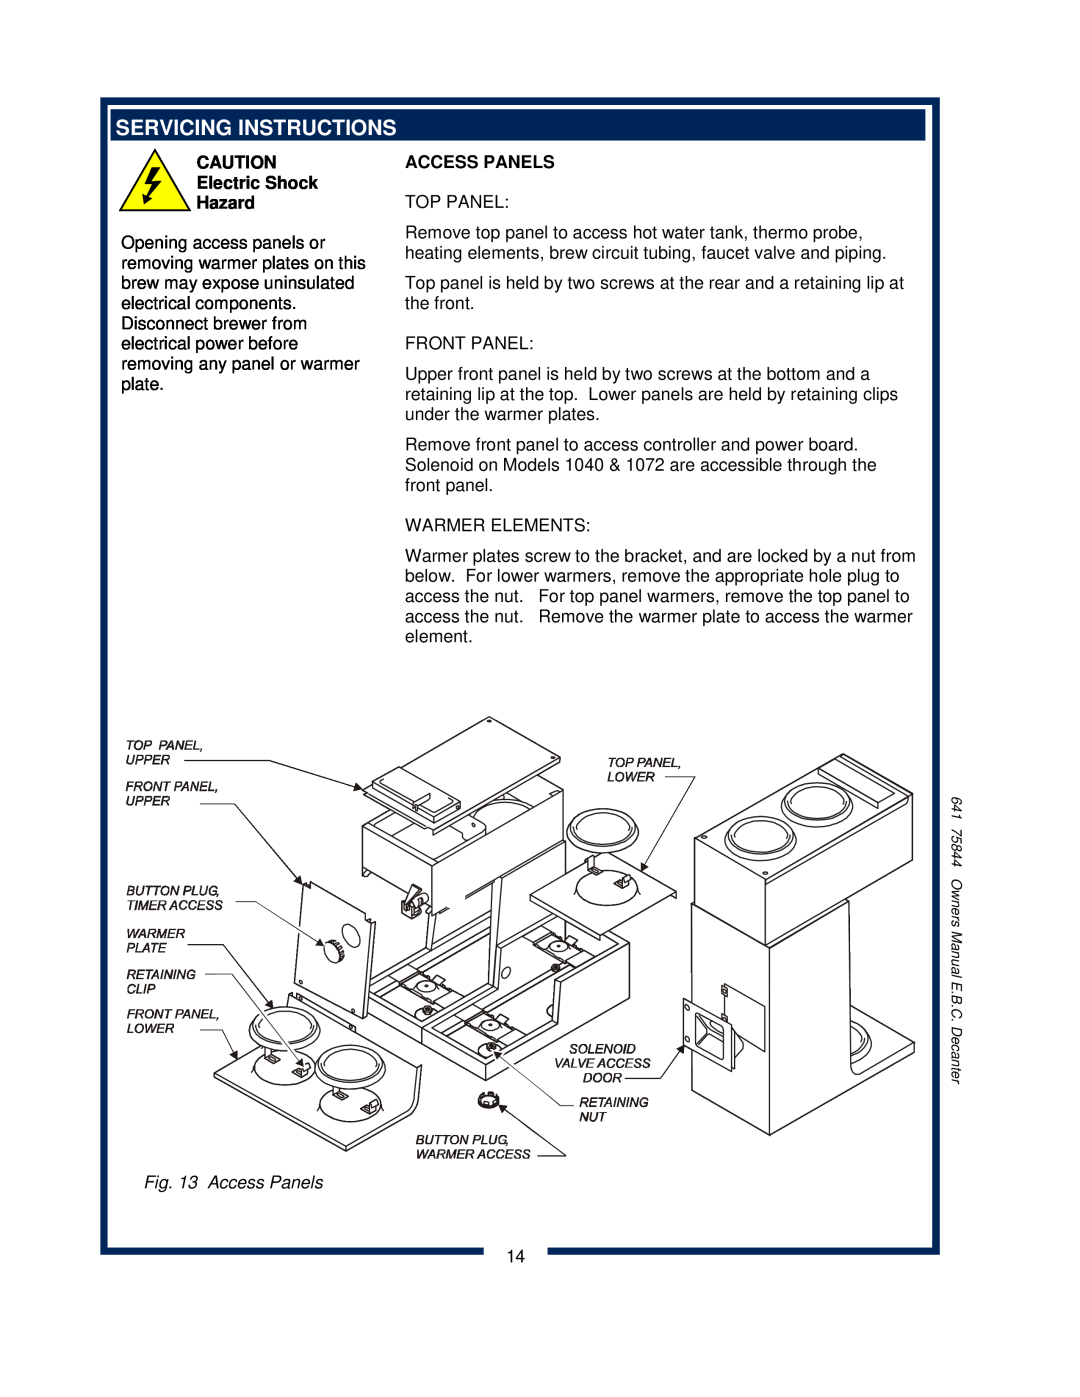 Bloomfield 1040, 1012, 1072 owner manual Servicing Instructions, Access Panels, Electric Shock Hazard 